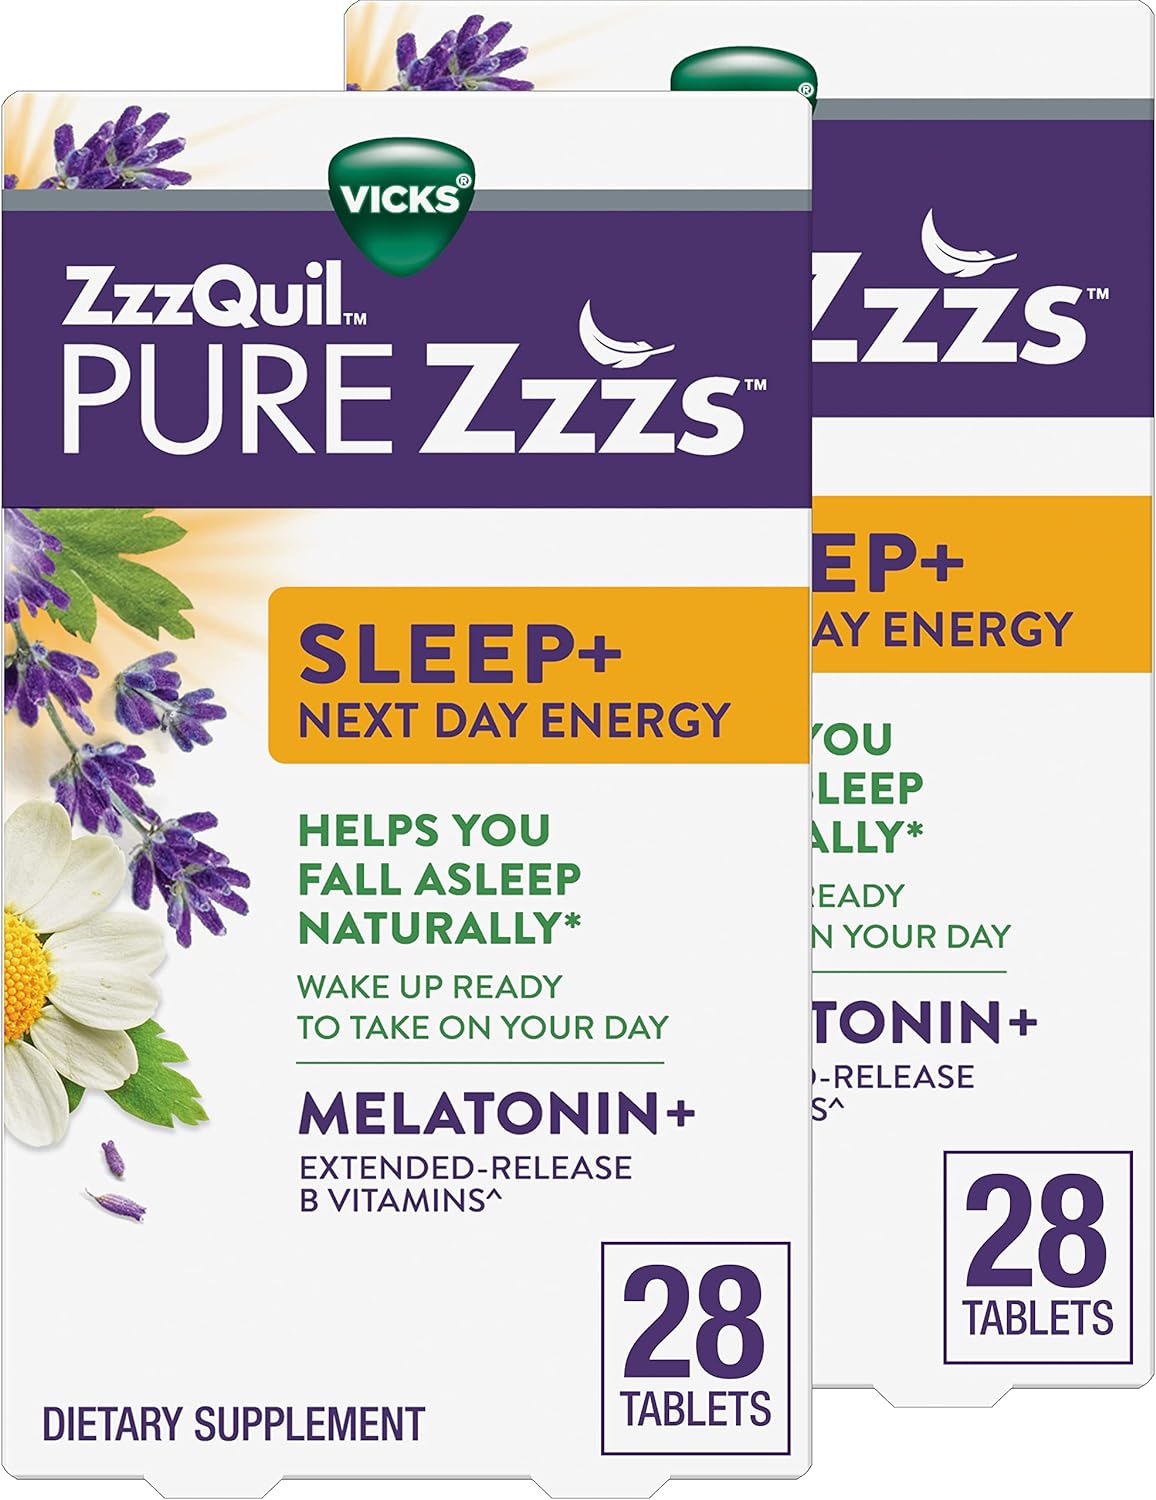 Vicks ZzzQuil PURE Zzzs Sleep+ Next Day Energy Extended Release Tablets, Immediate Release Melatonin, Extended Release B-Vitamins B1, B6, B12, Wake Up Ready to Take on the Day, Count 2x28